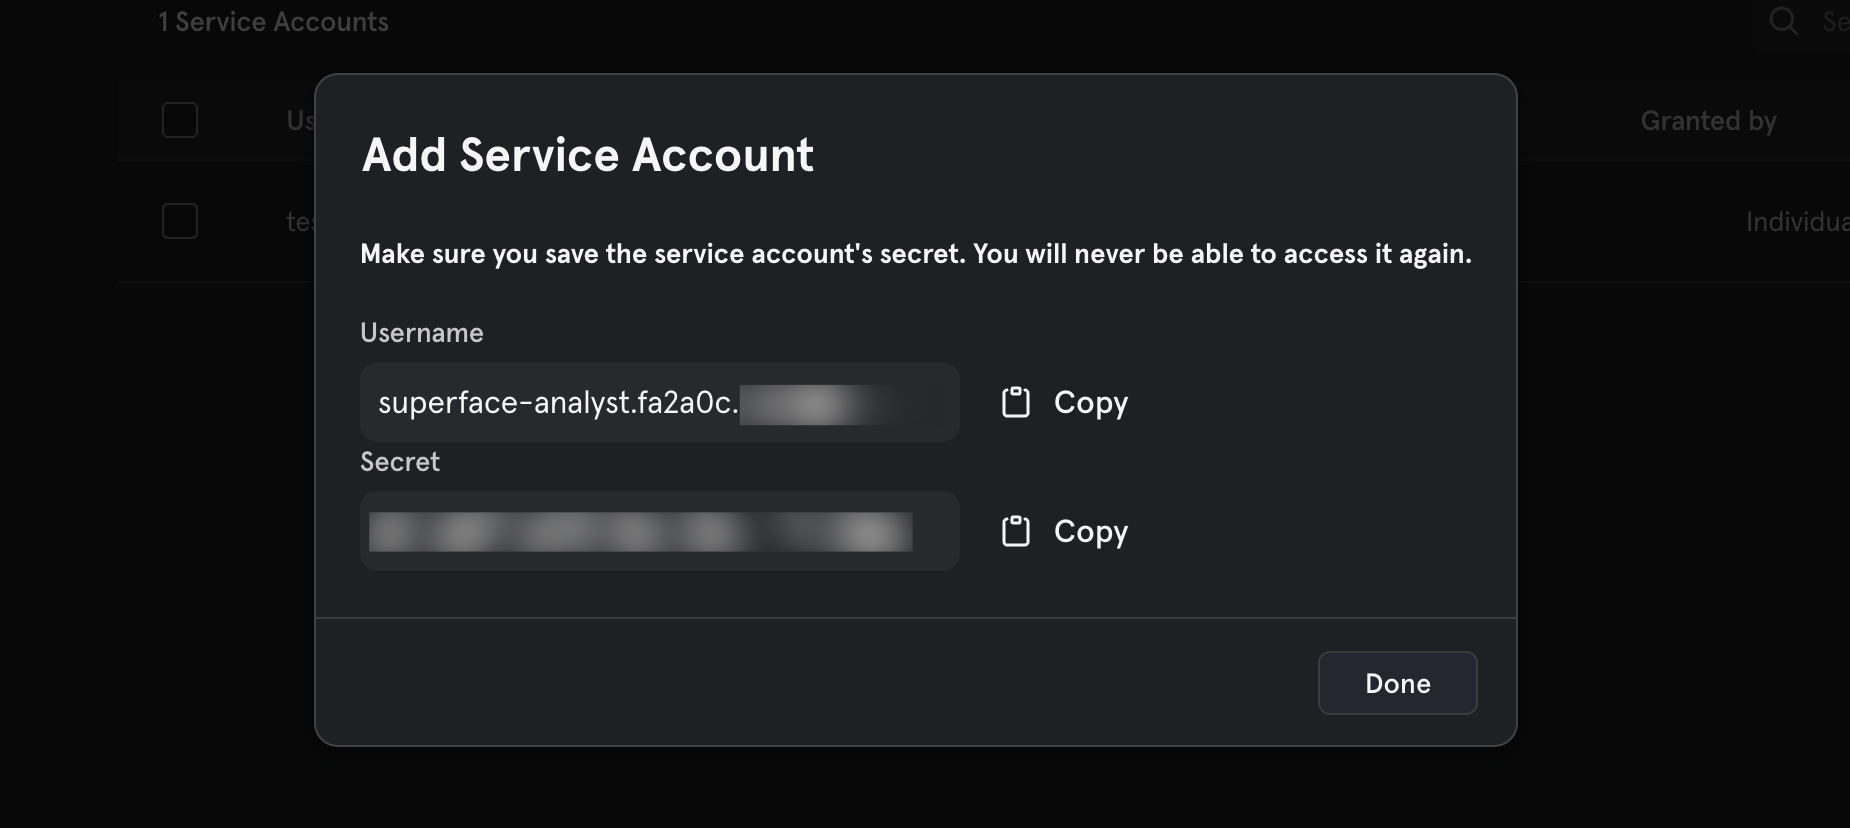 The service account credentials